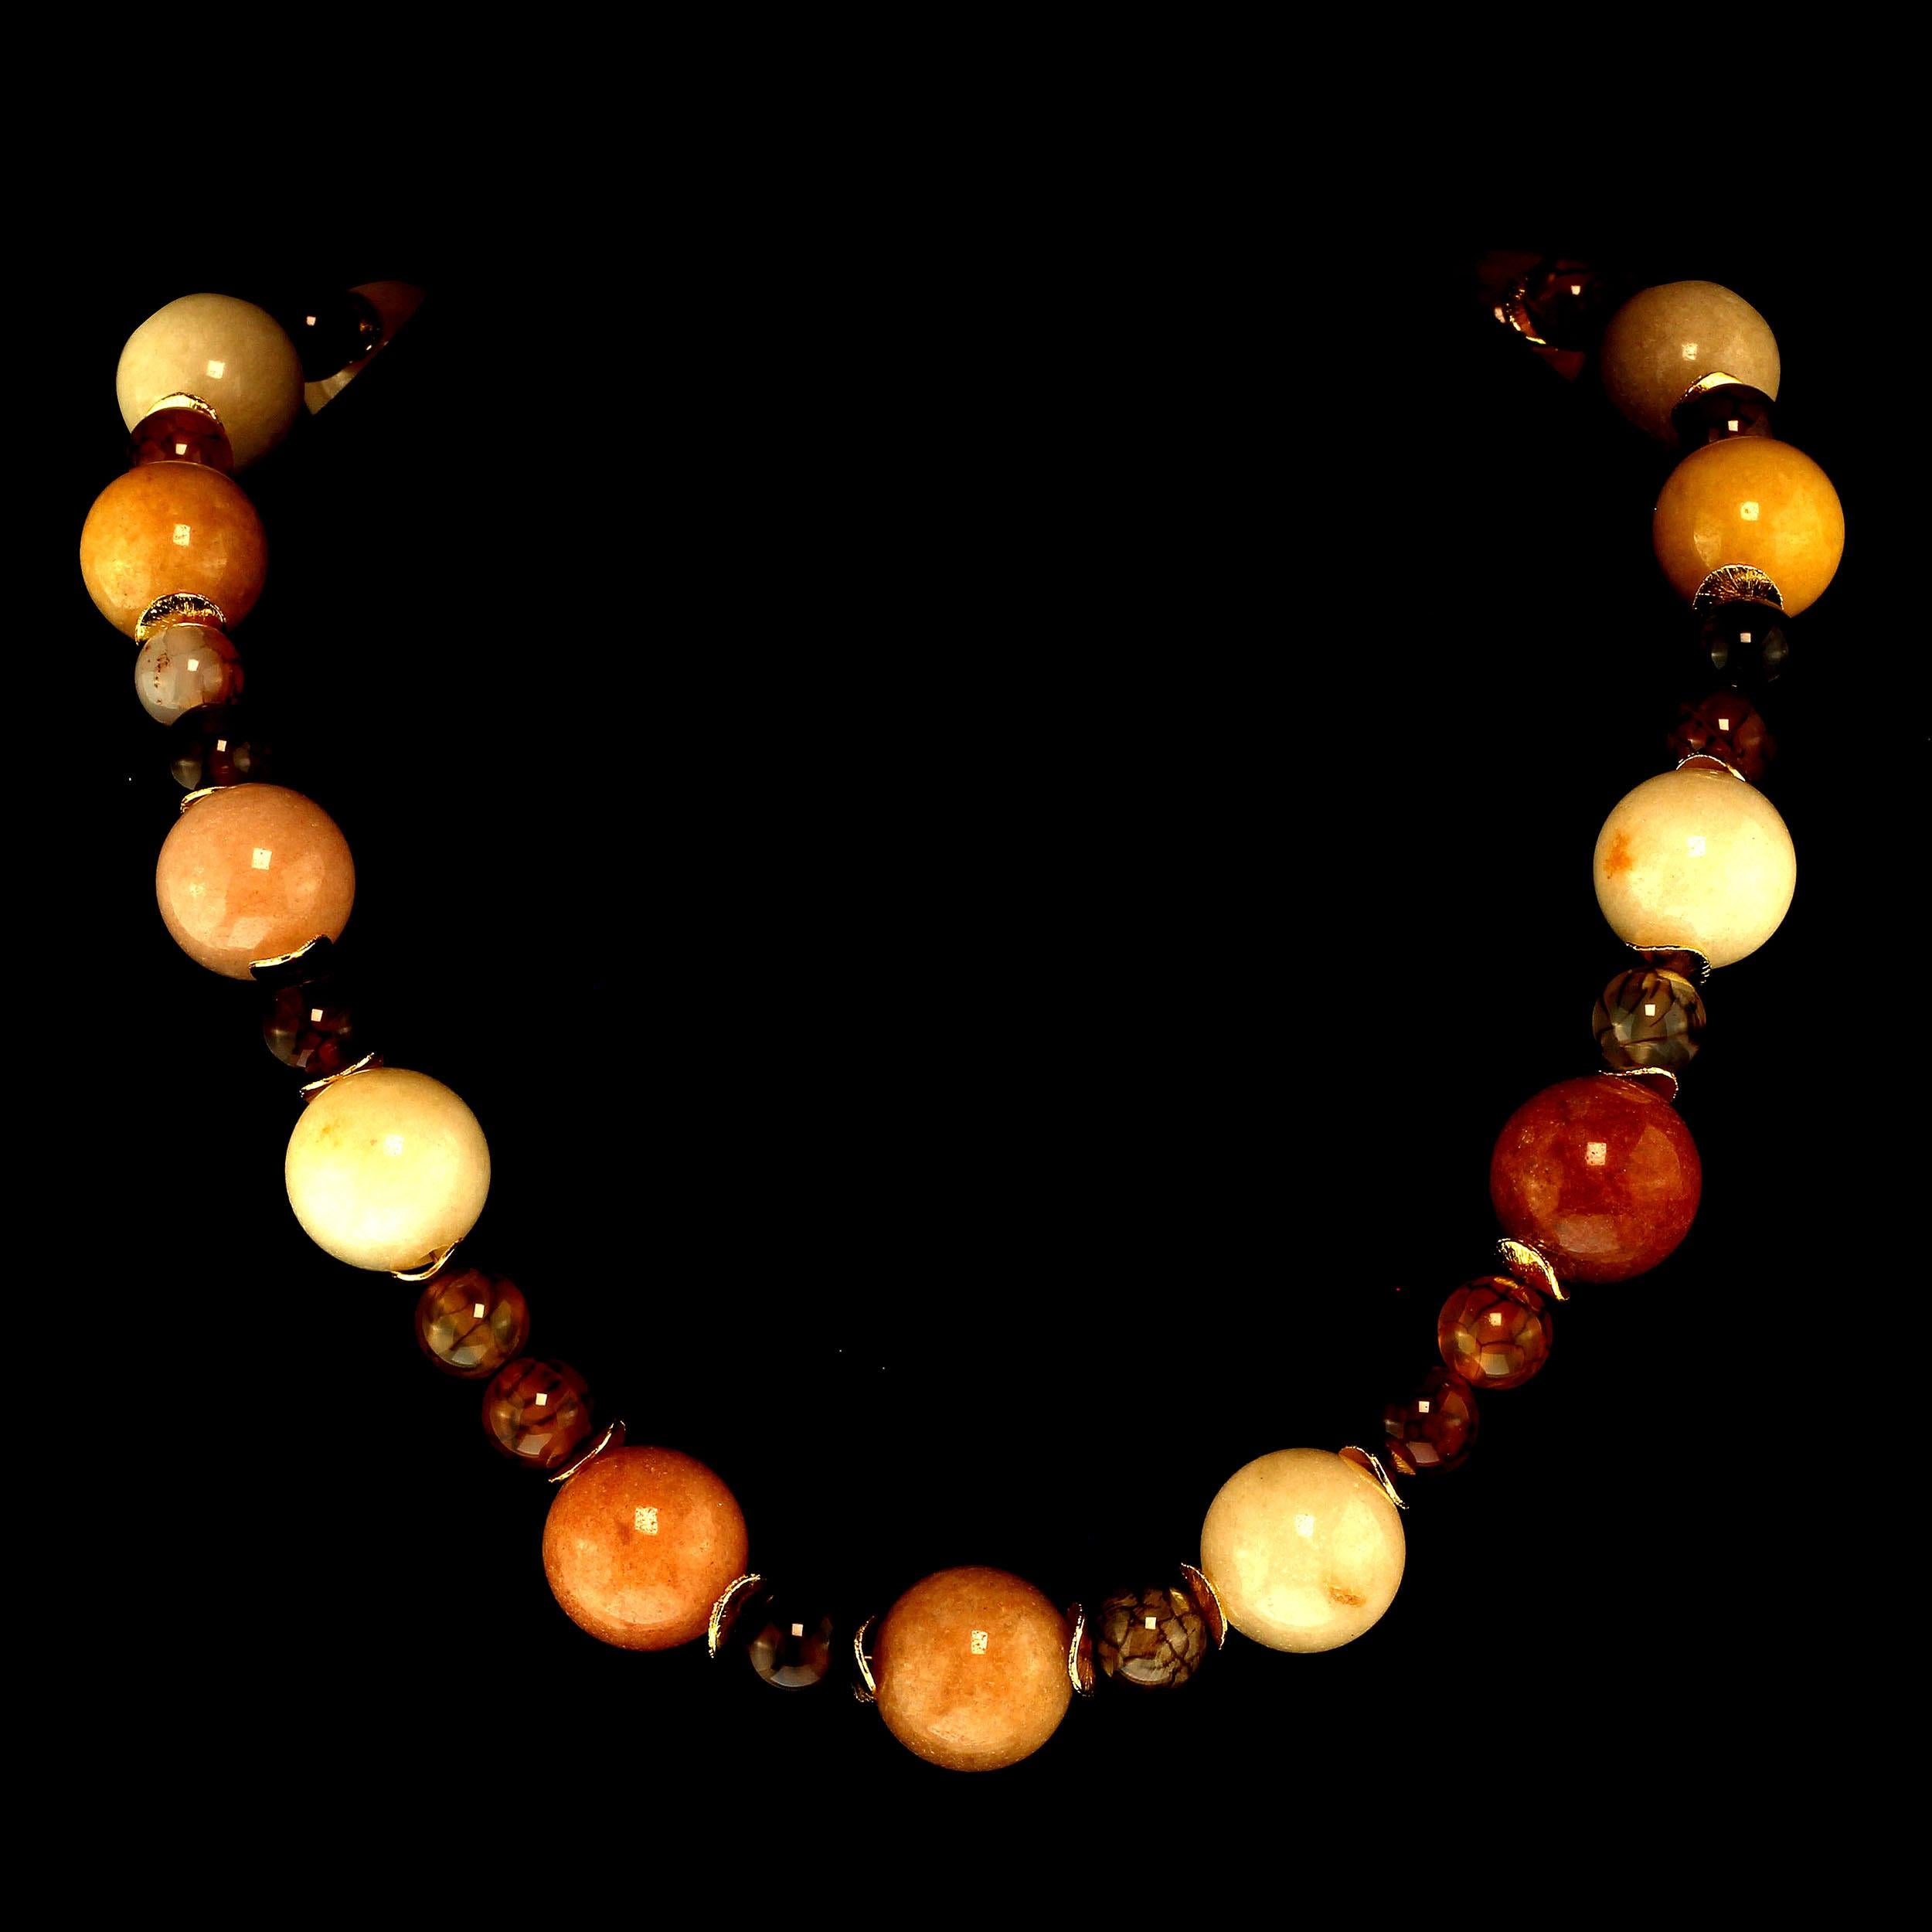 Unique, hand made  22 inch  dyed Jade and  Spiderweb Jasper necklace to brighten your day.  The 18 MM Jade is multi shades of gold and cream.  The distinctive 10 MM Spiderweb Jasper is various shades of rust, cream, and brown with the 'webs' weaving